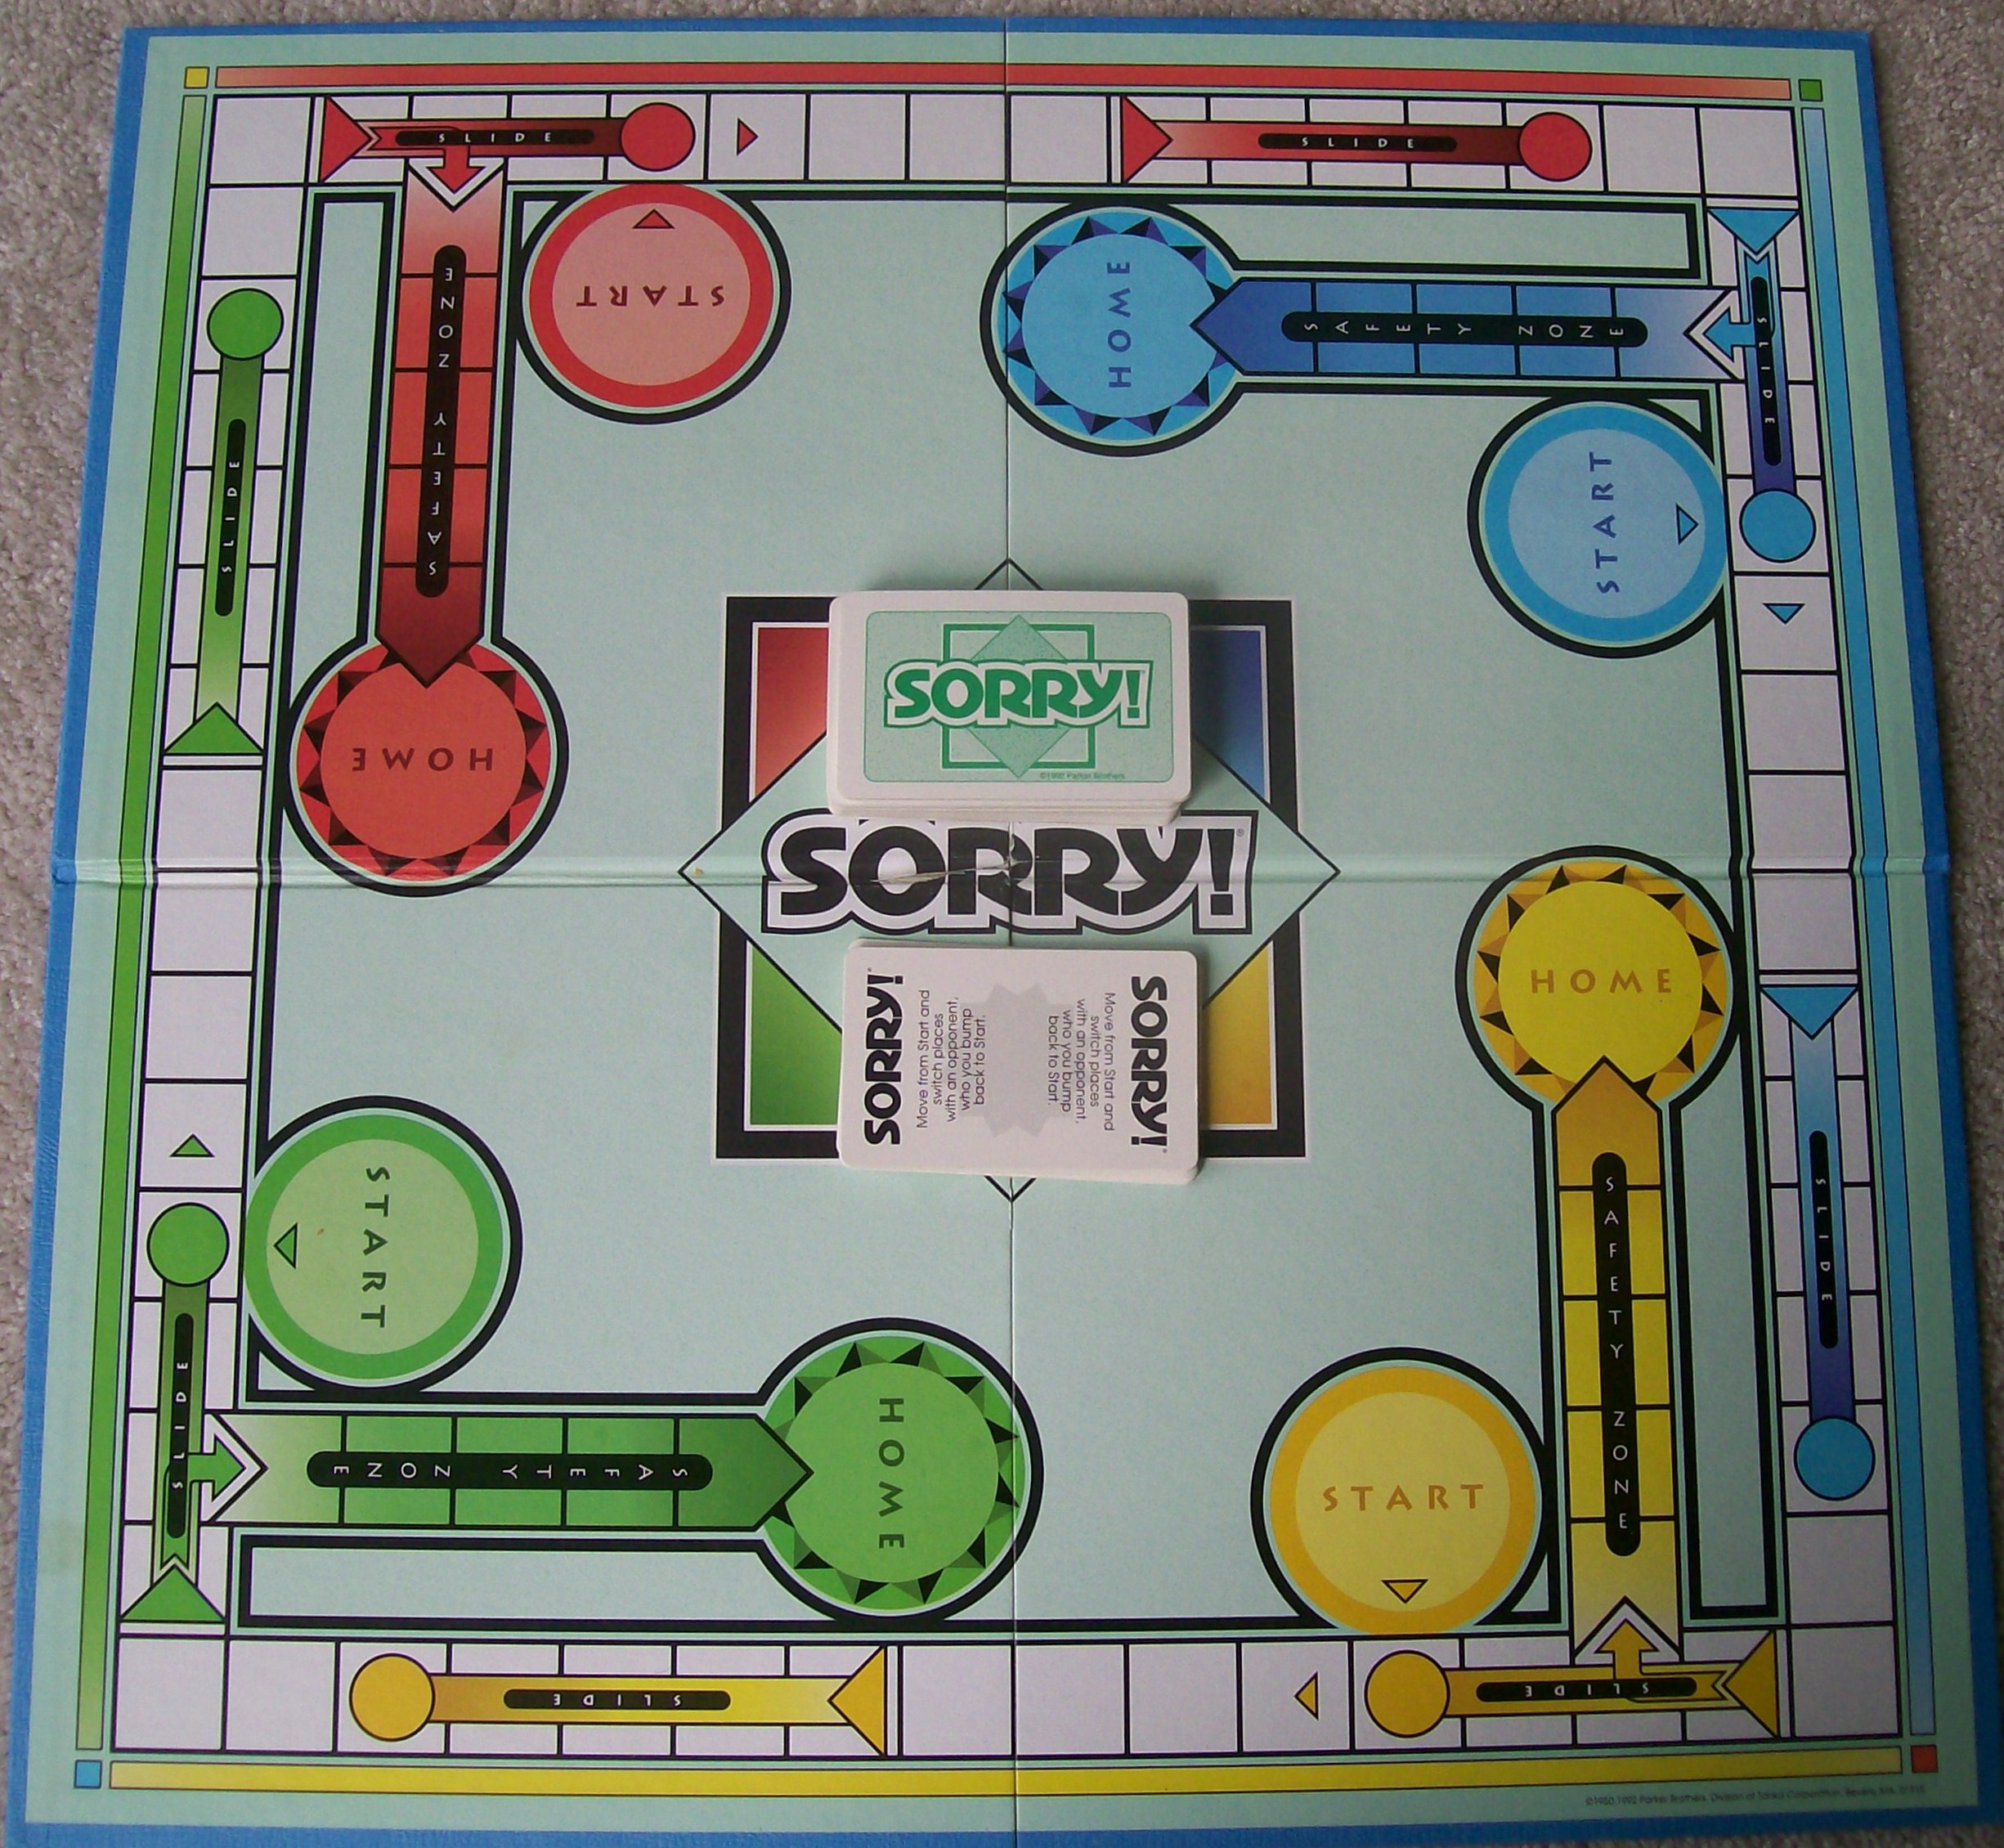 Classic Board Game of Sorry All About Fun and Games